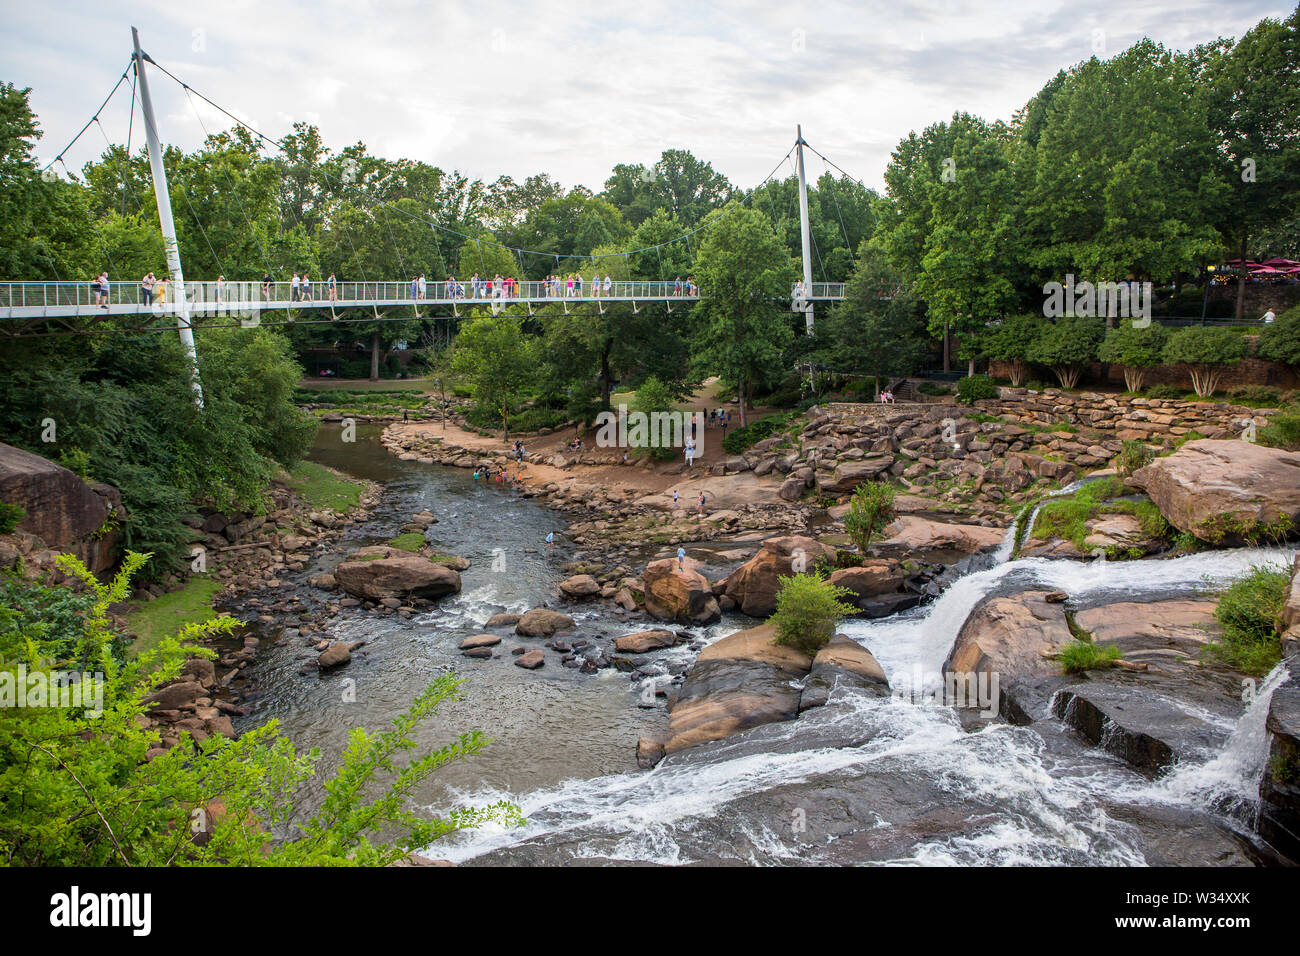 Visitors to Falls Park linger on Liberty Bridge overlooking the Reedy River waterfalls in downtown Greenville, South Carolina. Stock Photo